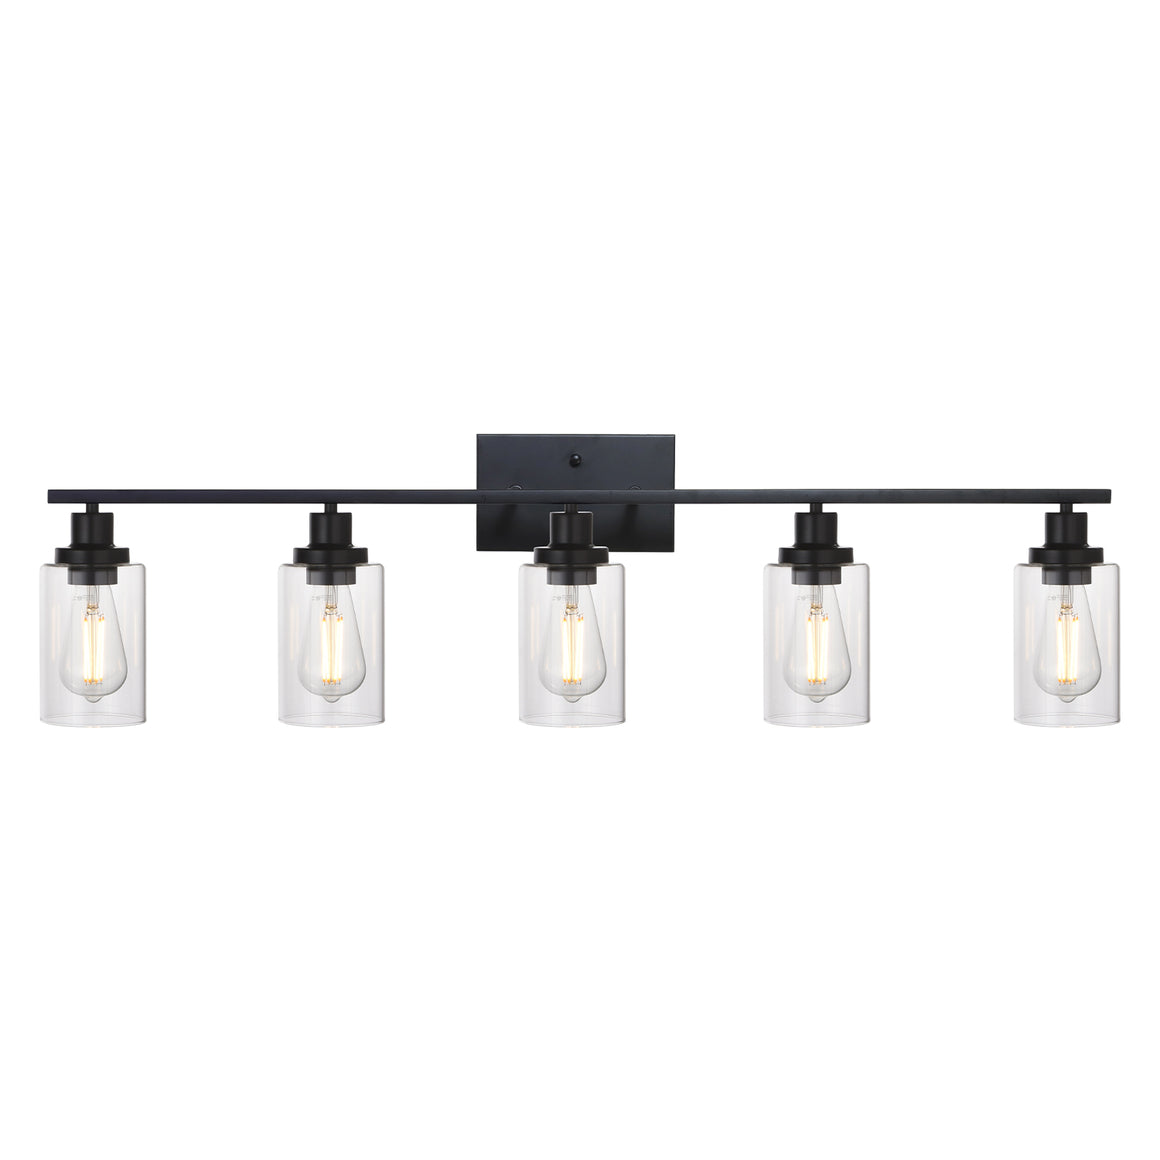 BONLICHT 40 Inches Length 5-Light Bathroom Vanity Light Fixtures Black Wall Sconce Lighting with Clear Glass Shade